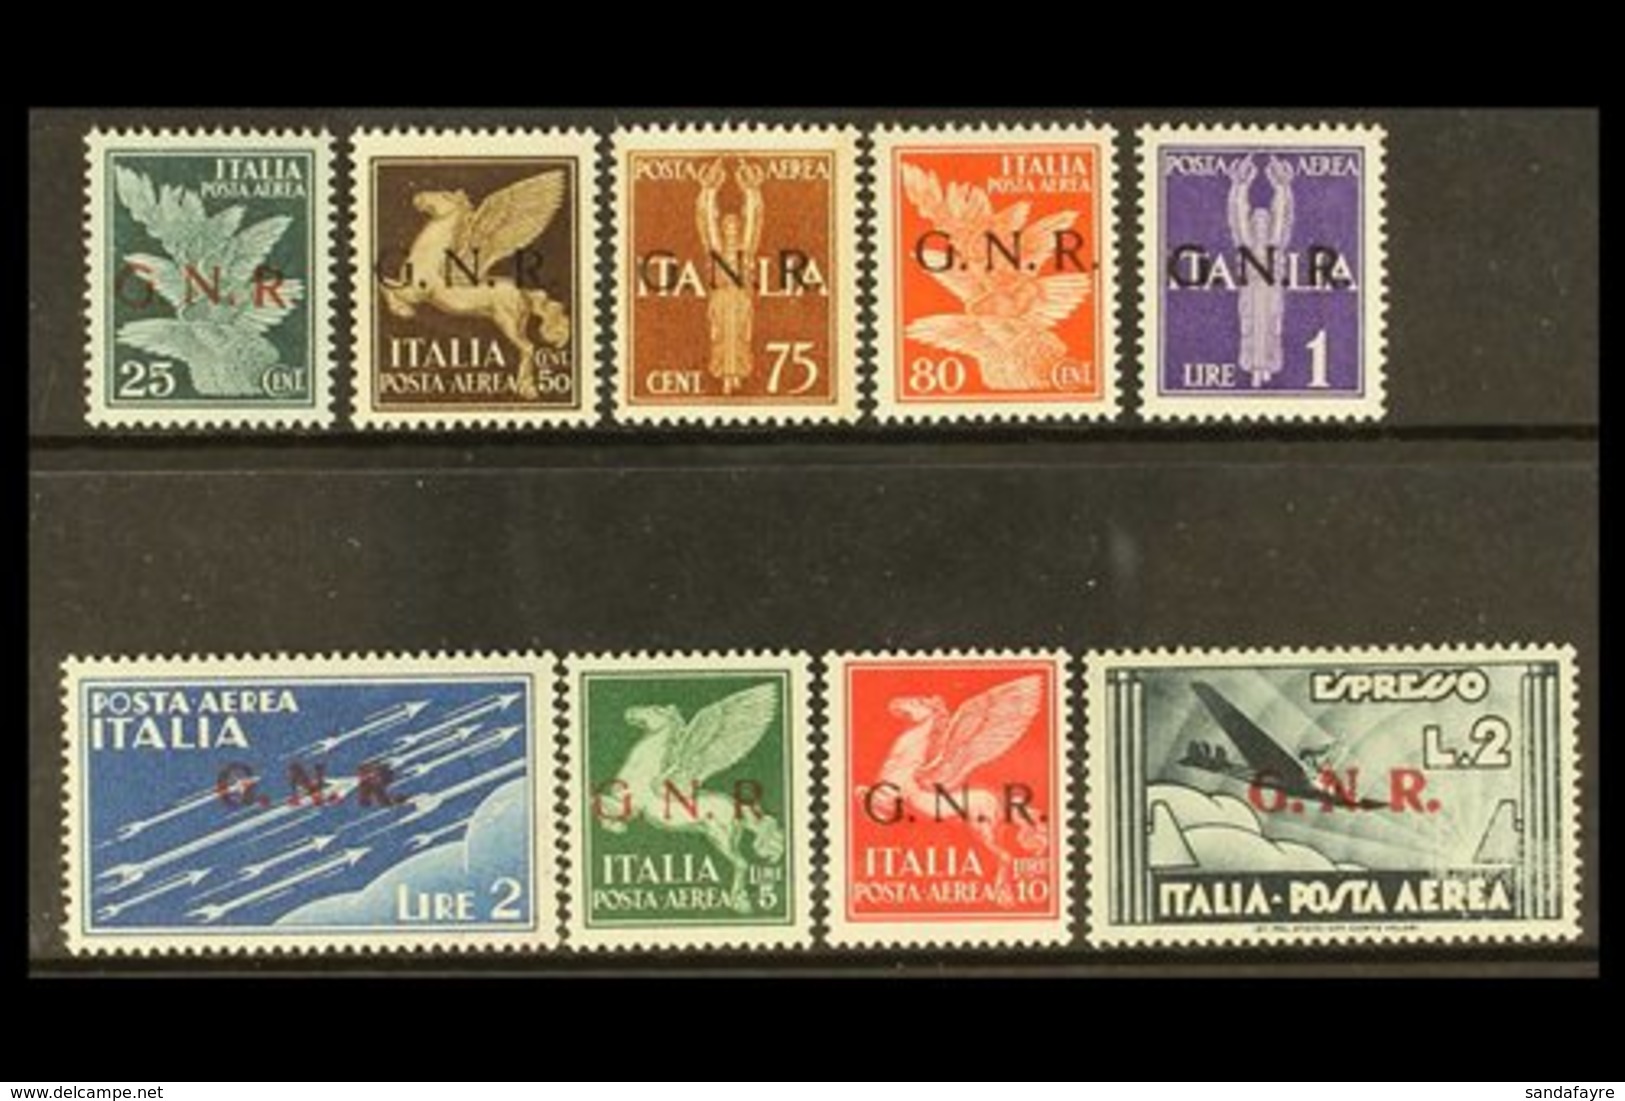 ITALIAN SOCIAL REPUBLIC (RSI) 1944 Airmail Set Including The Air Express Stamp Overprinted "G.N.R." In Verona, Sassone S - Unclassified